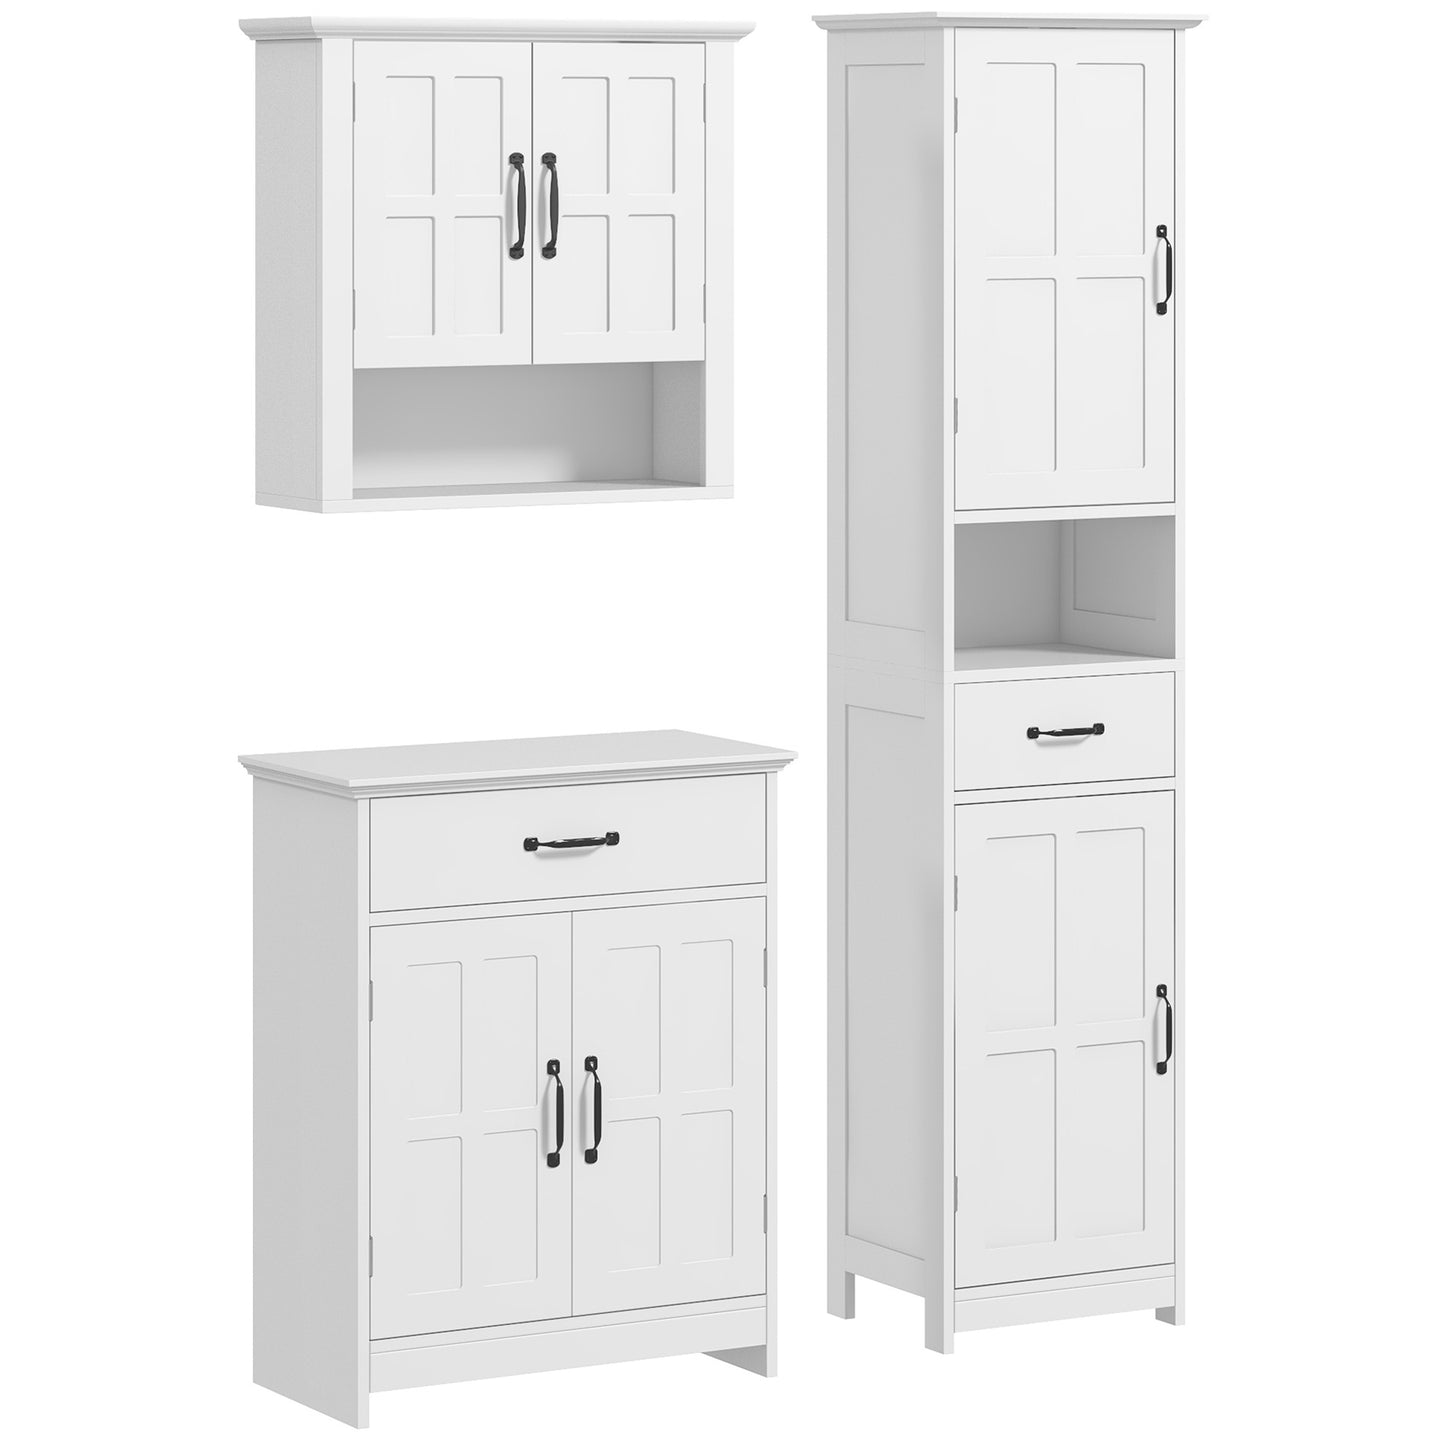 3-Piece Bathroom Furniture Set, Modern Bathroom Storage Cabinet with Drawers and Shelves, Tall and Small Floor Cabinets, Wall-mounted Medicine Cabinet, White